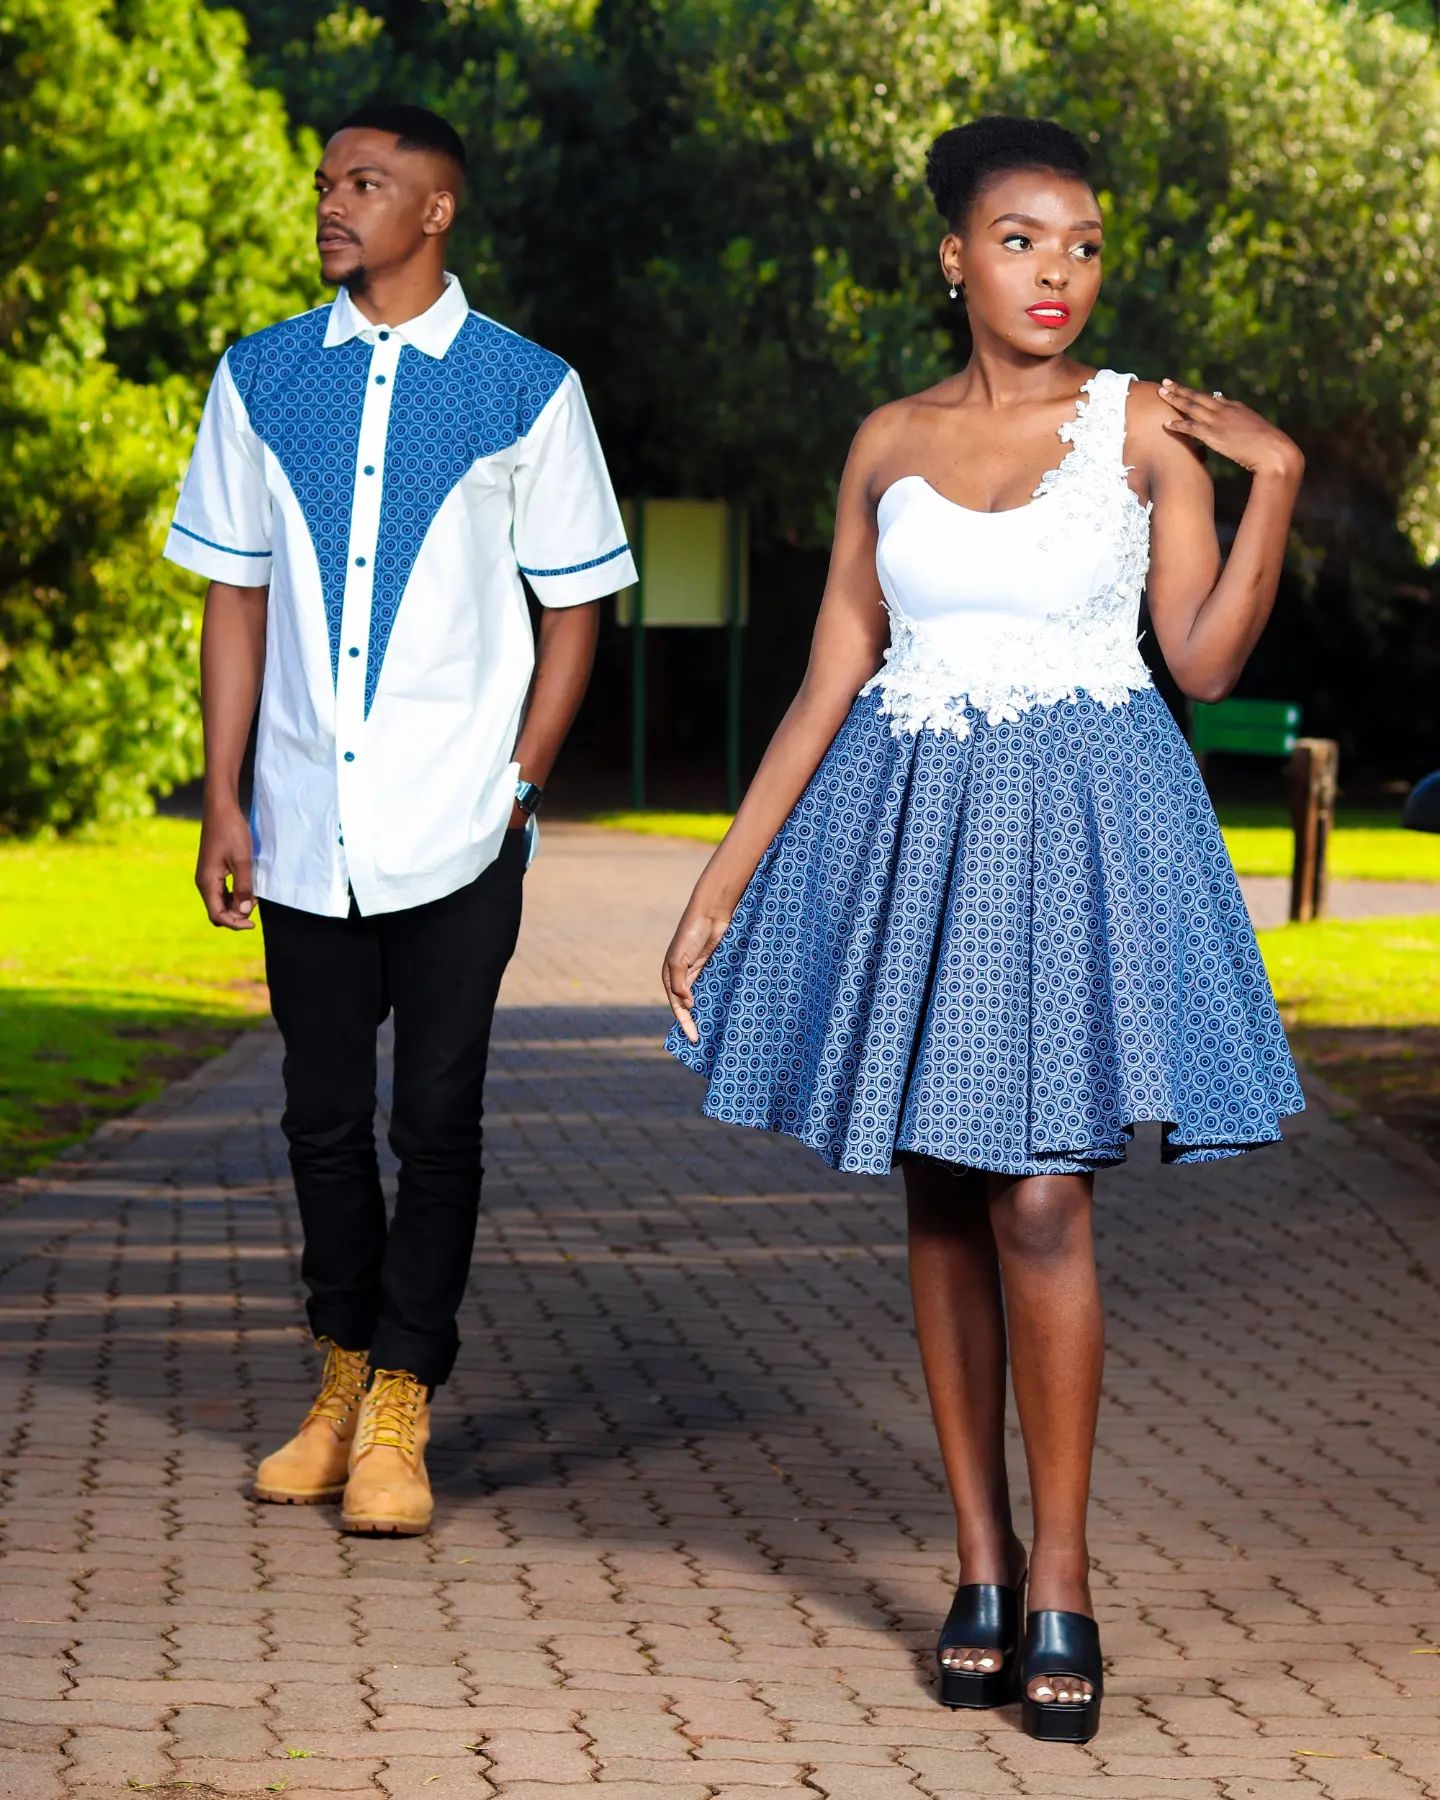 The Best South African Tswana Conventional Dresses For Wedding 17